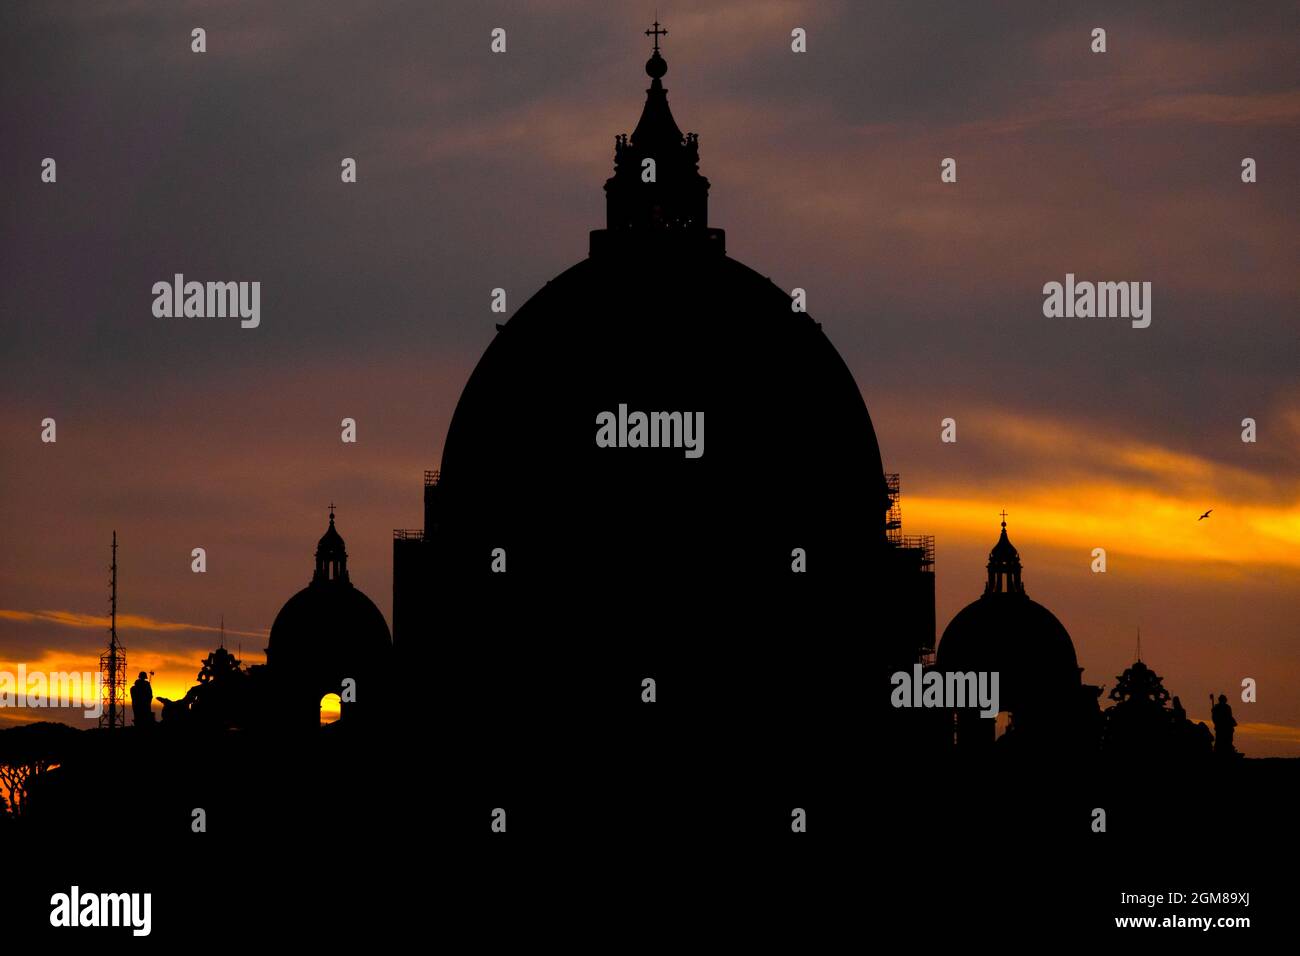 Silhouette of the Dome of the Saint Peter's Basilica at sunset, Vatican City Stock Photo